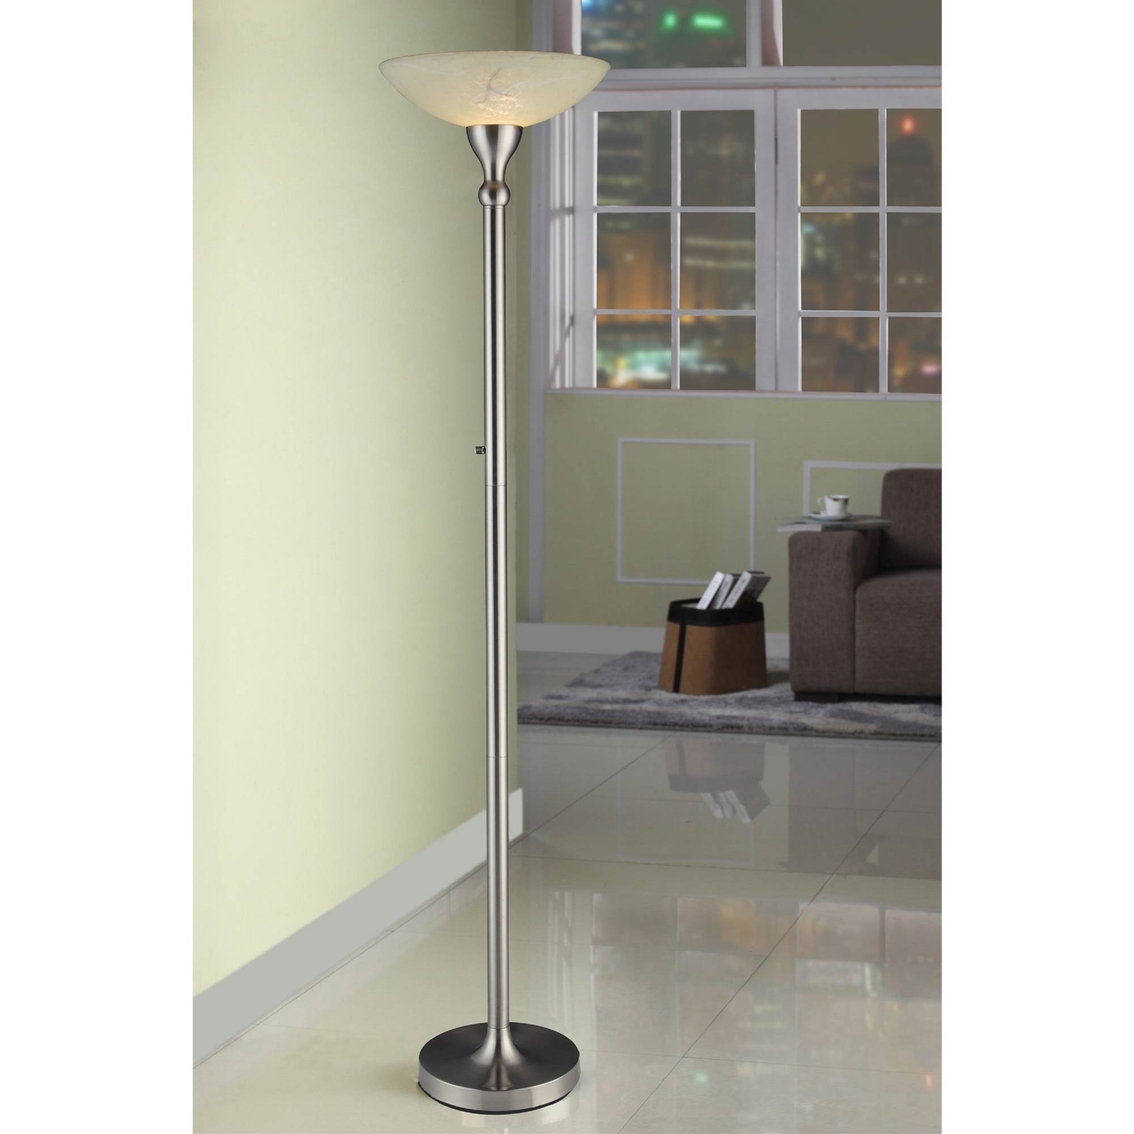 Artiva USA Torchiere 71 Inch Compact Torchiere Floor Lamp - Image 2 of 2